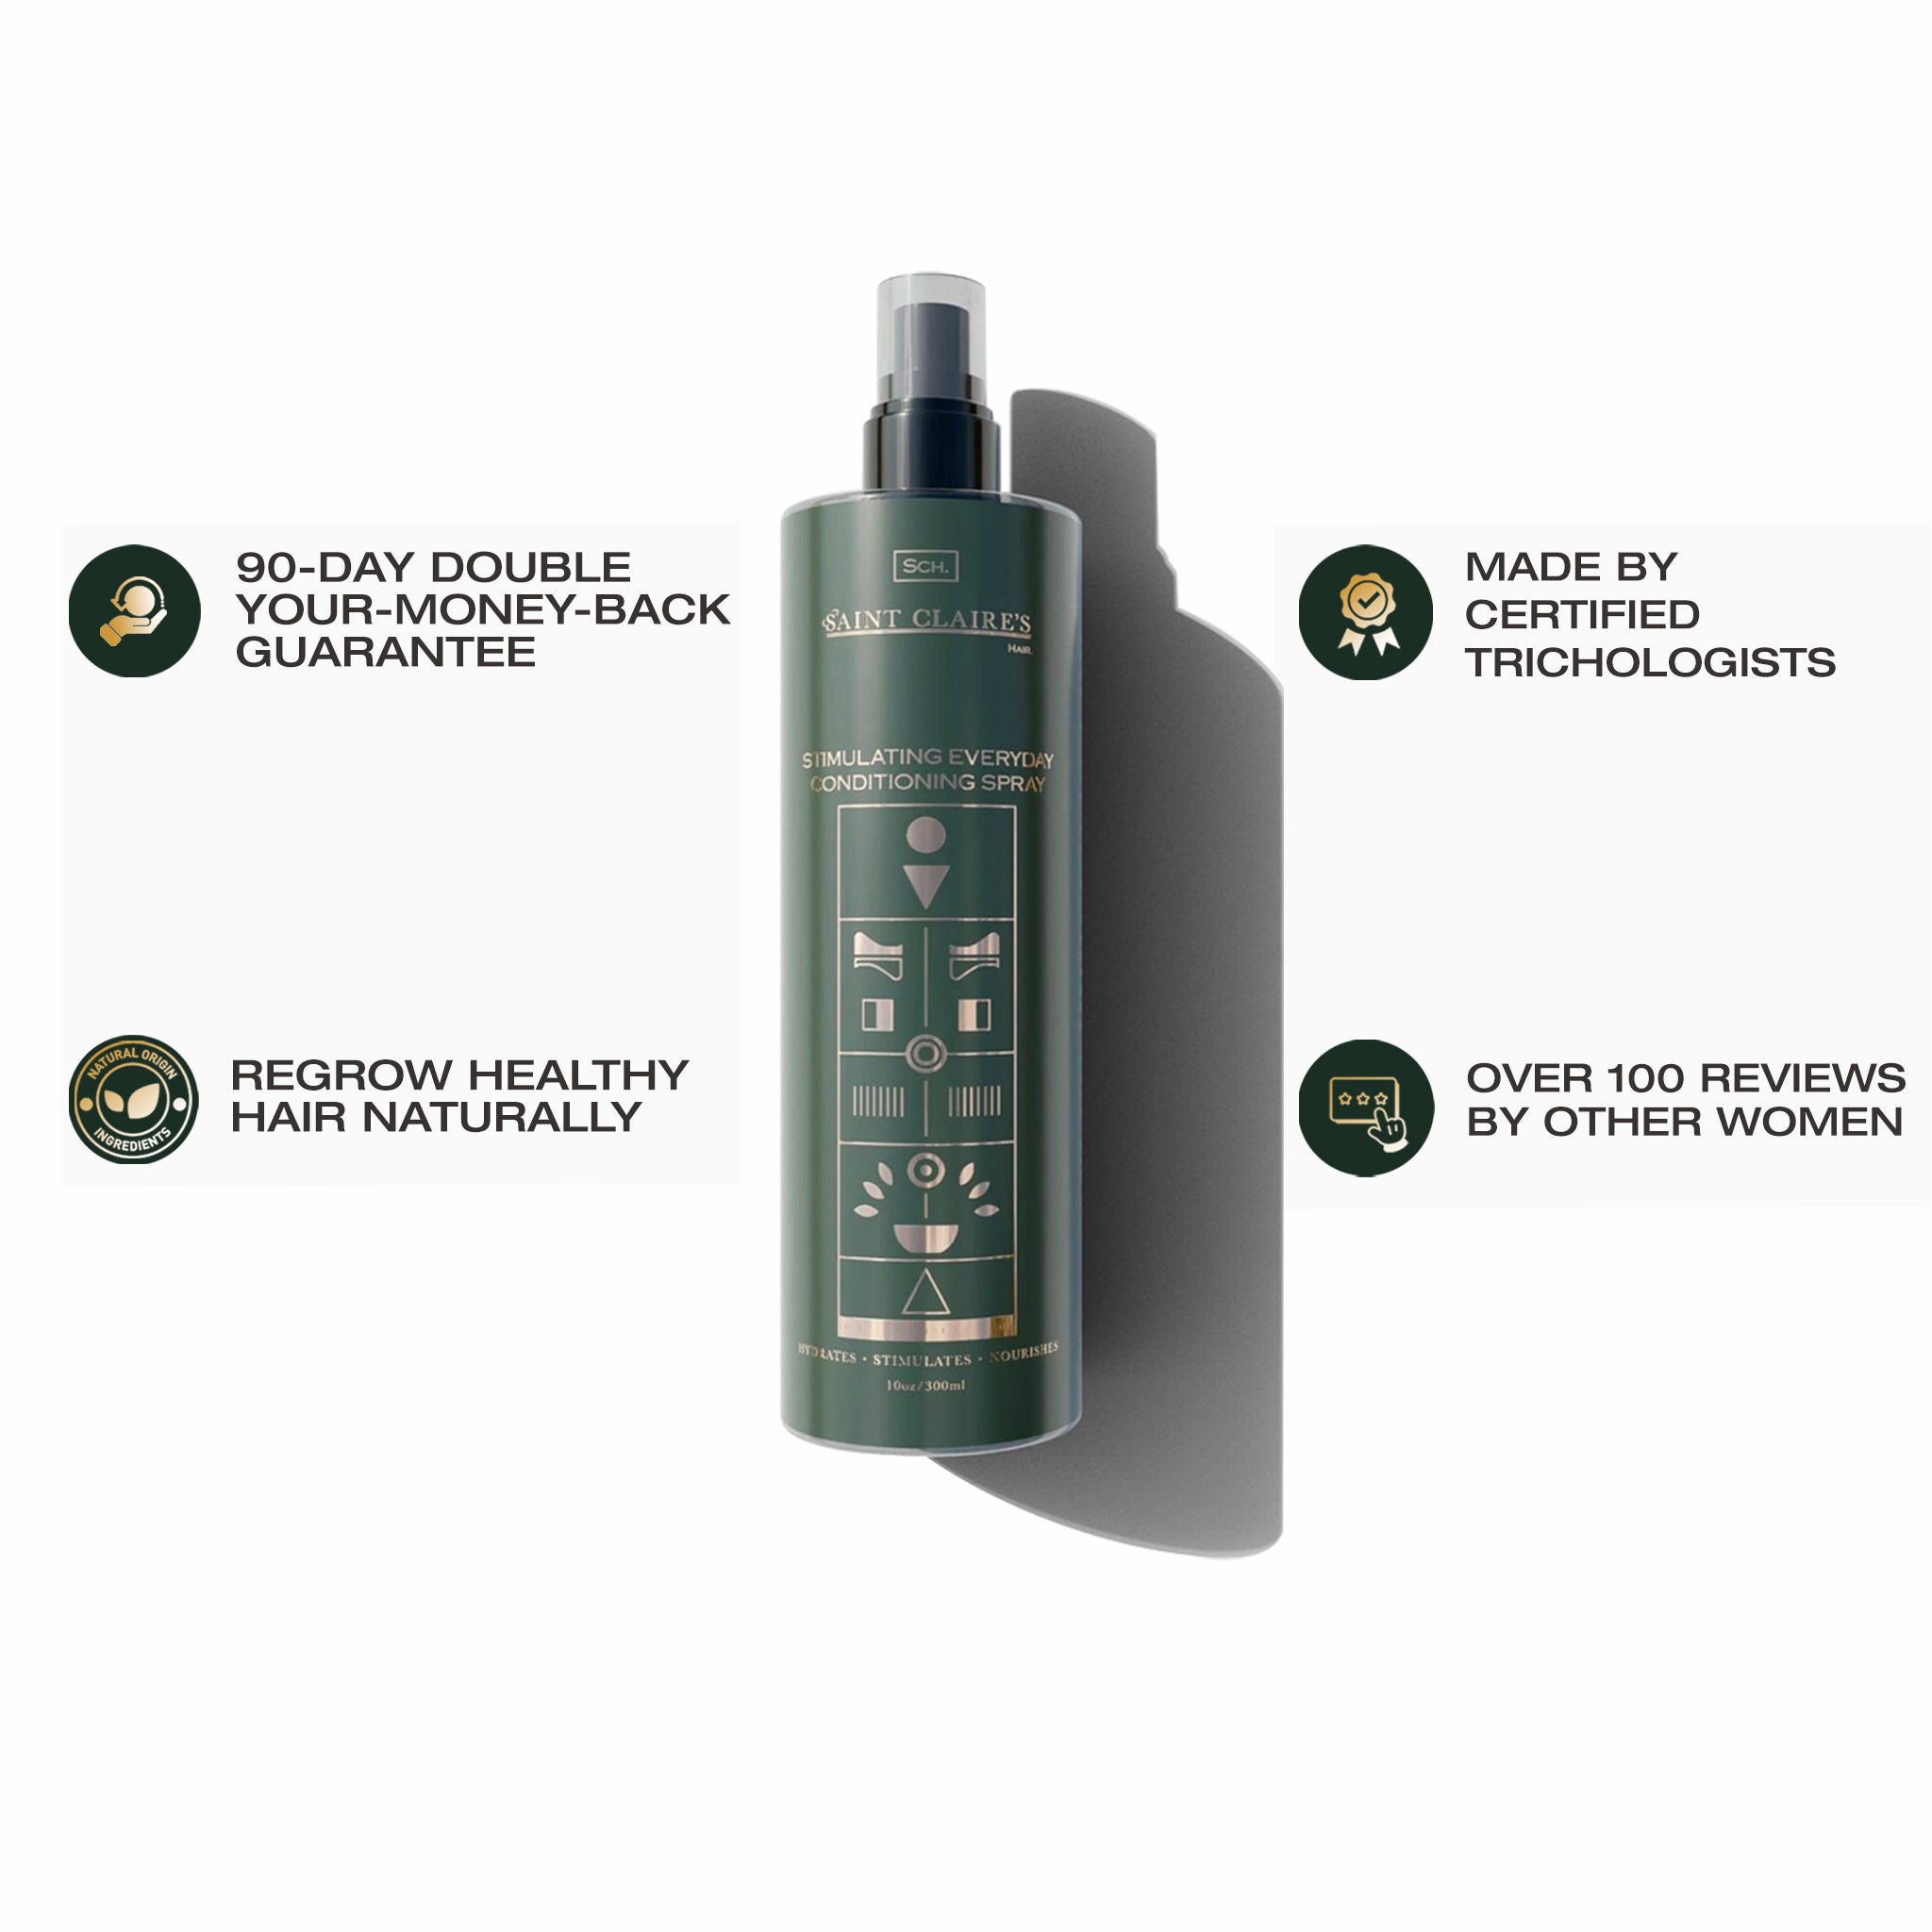 ST CLAIRE'S STIMULATING EVERYDAY CONDITIONING SPRAY – St Claire's Hair